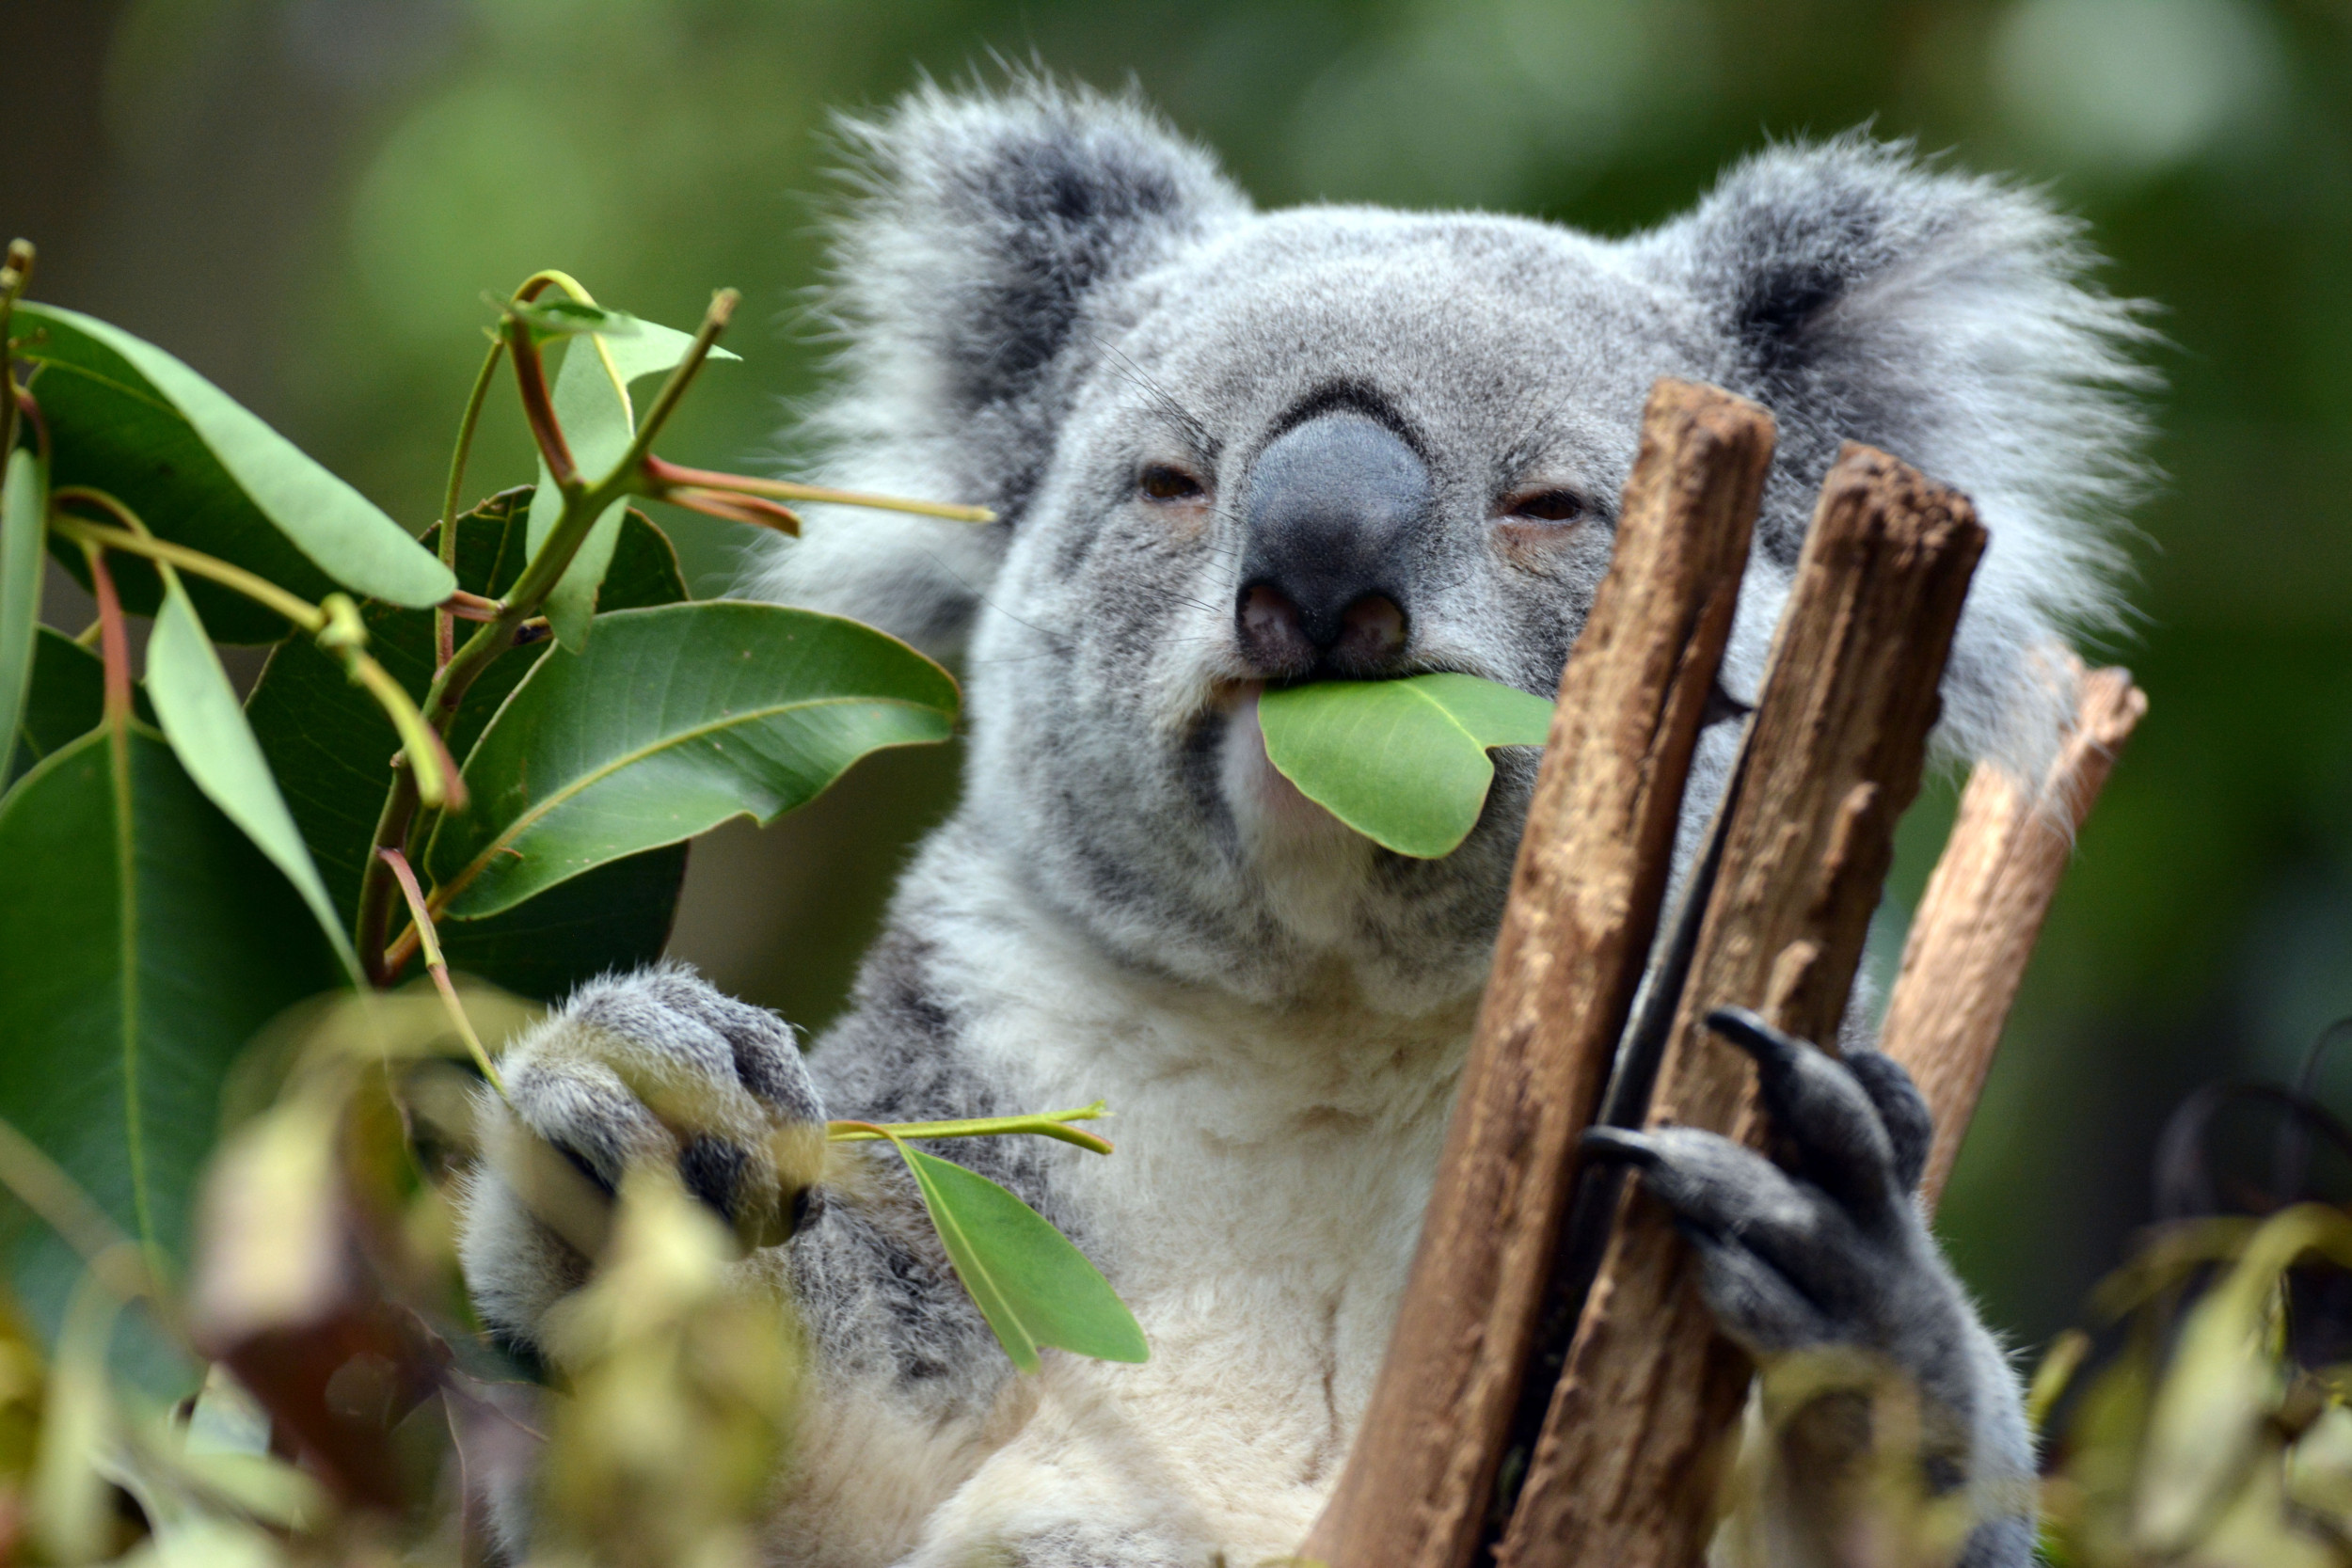 Greedy Koala Eats Nearly $4,000 Worth of Plants Meant for Others